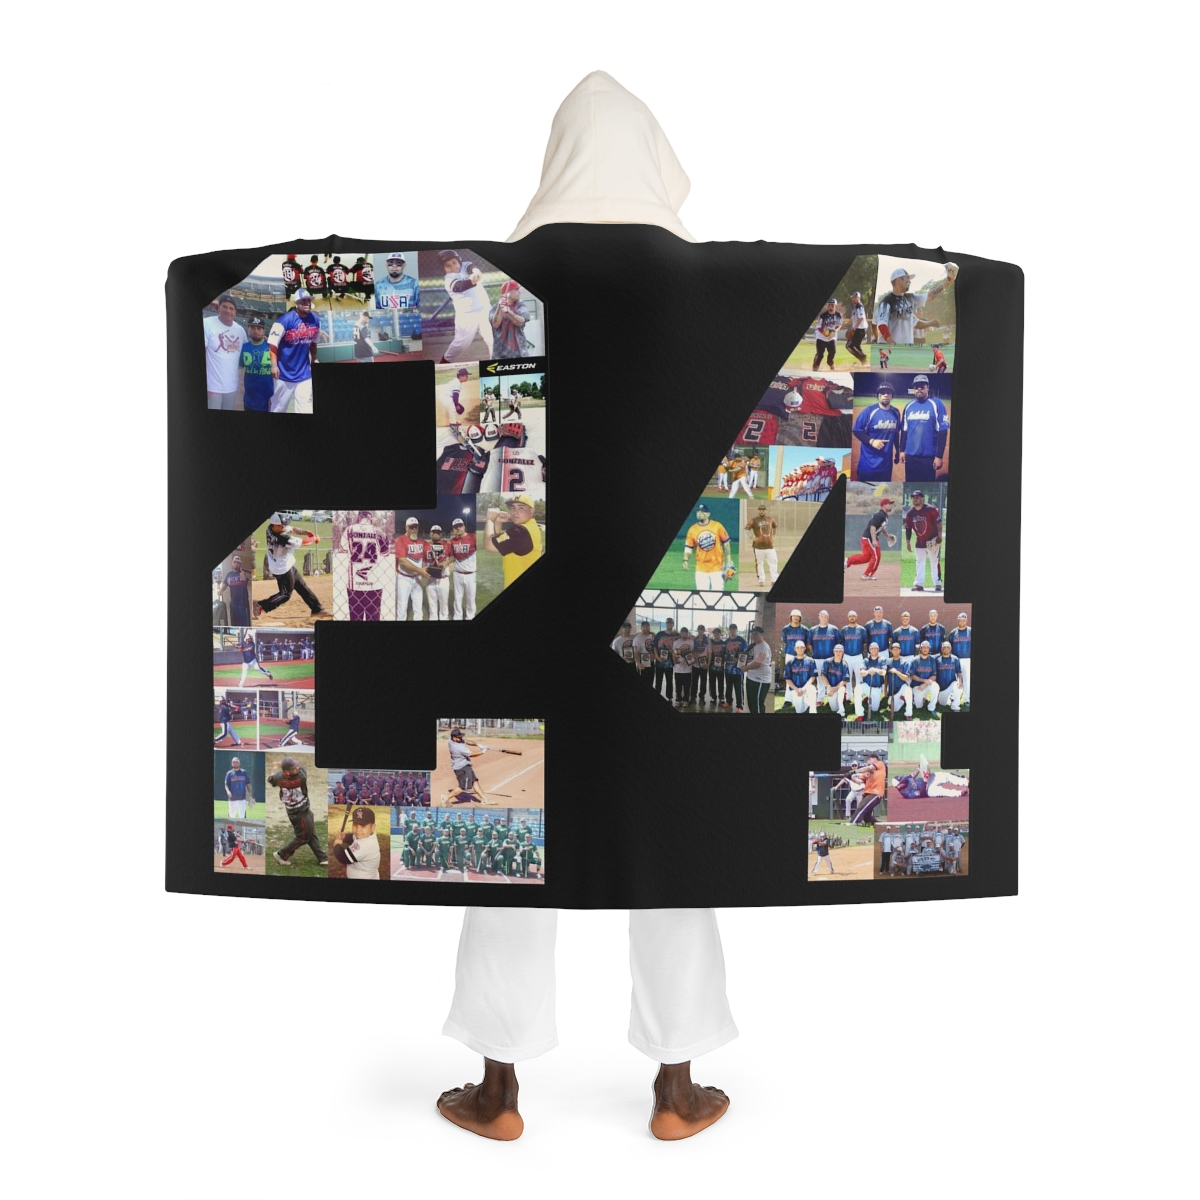 Photo blankets come in creative formats like this hooded sherpa fleece blanket featuring your favorite player's jersey numbers.